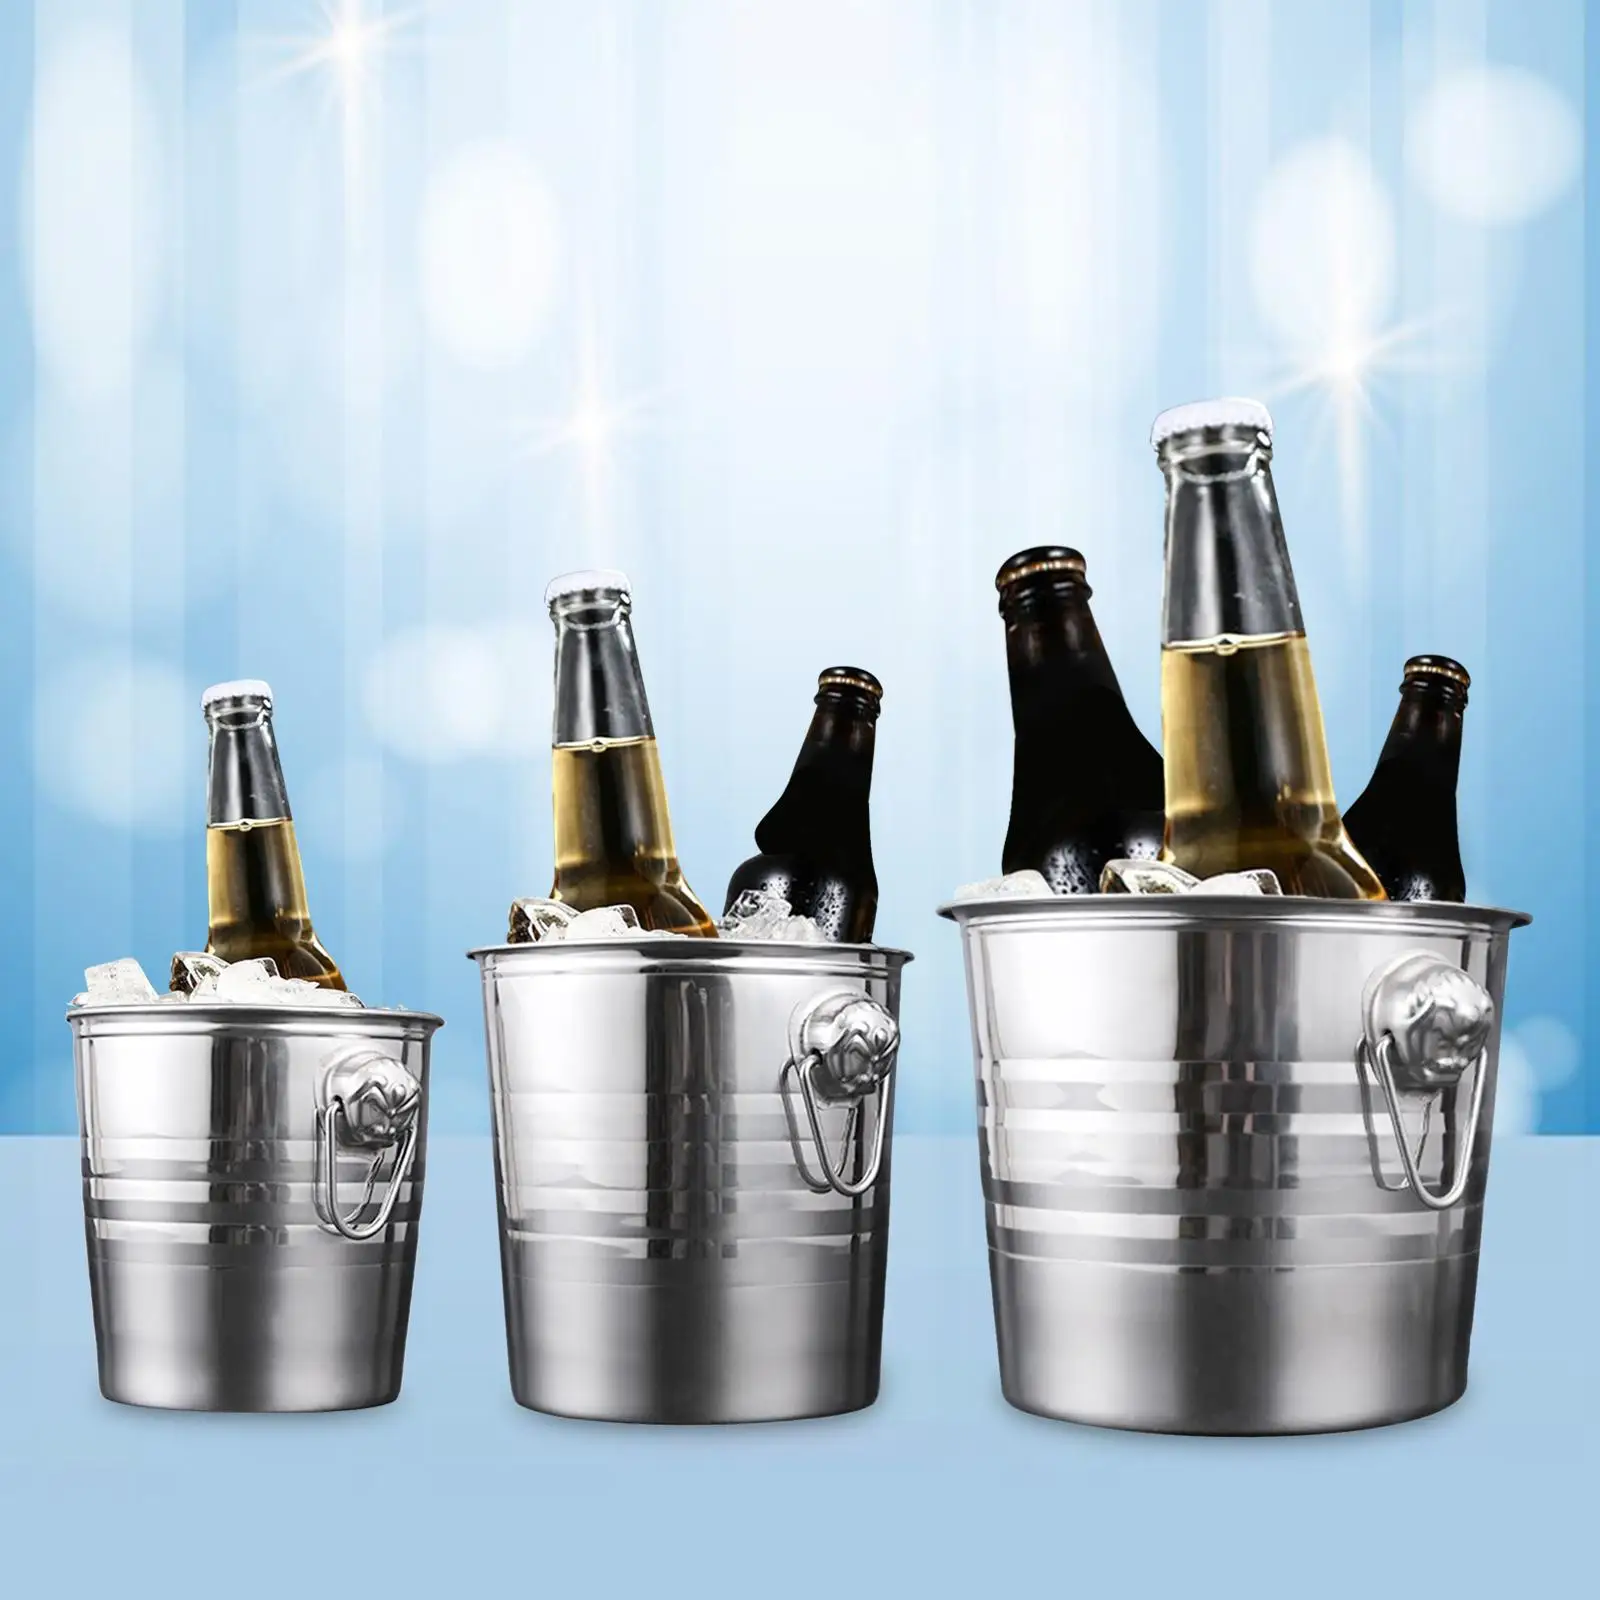 Ice Bucket Double Walled Thickened Ice Bin for Bottle Chilling Beers Home Bar